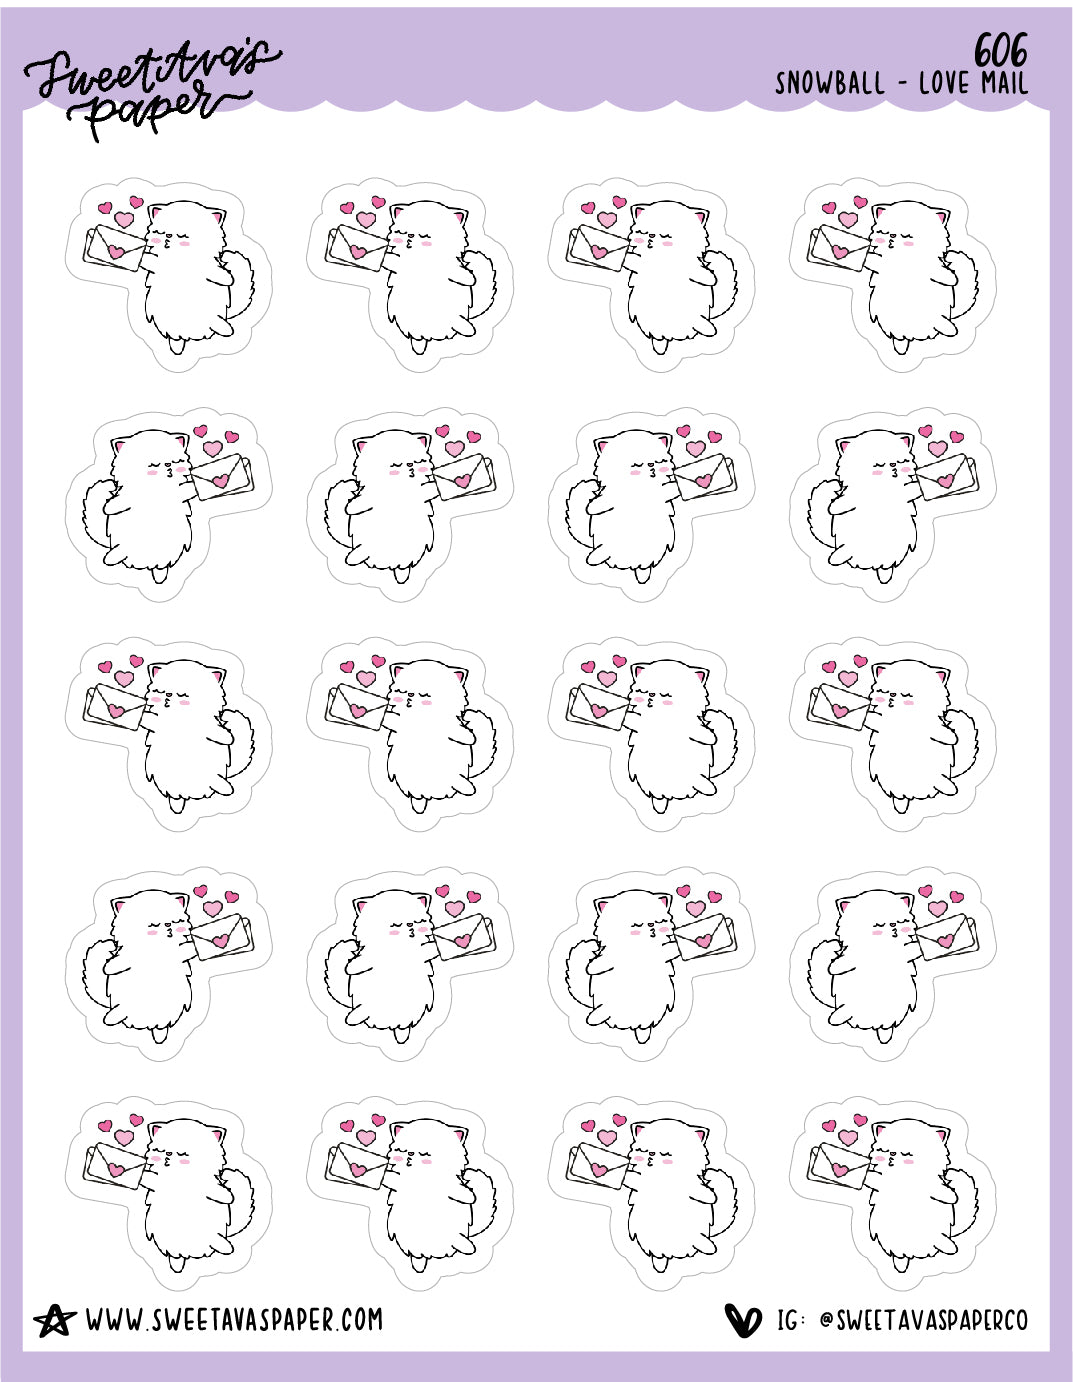 Snowball Love Letters Planner Stickers - Snowball The Cat - [606]